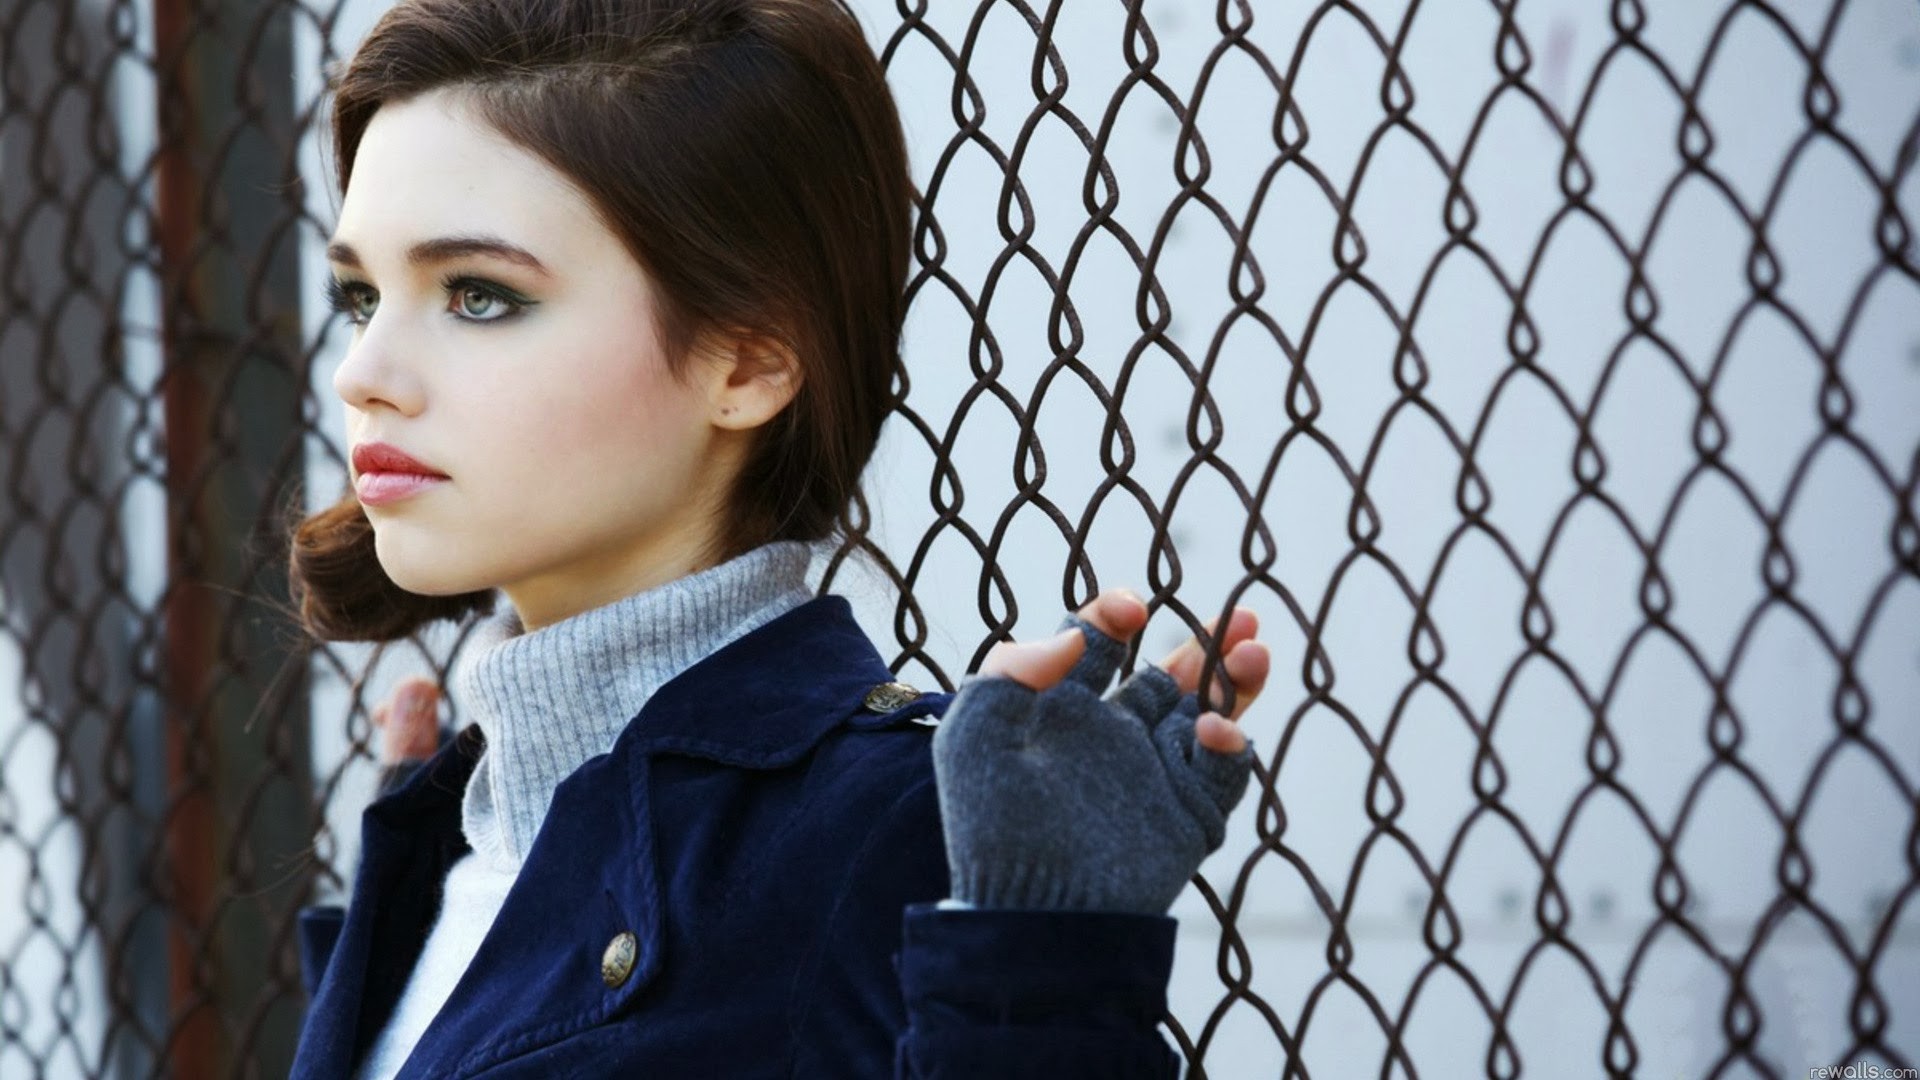 People 1920x1080 brunette women fence India Eisley fingerless gloves pale blue coat grey sweater gloves makeup closed mouth turtlenecks glamour girls model young women